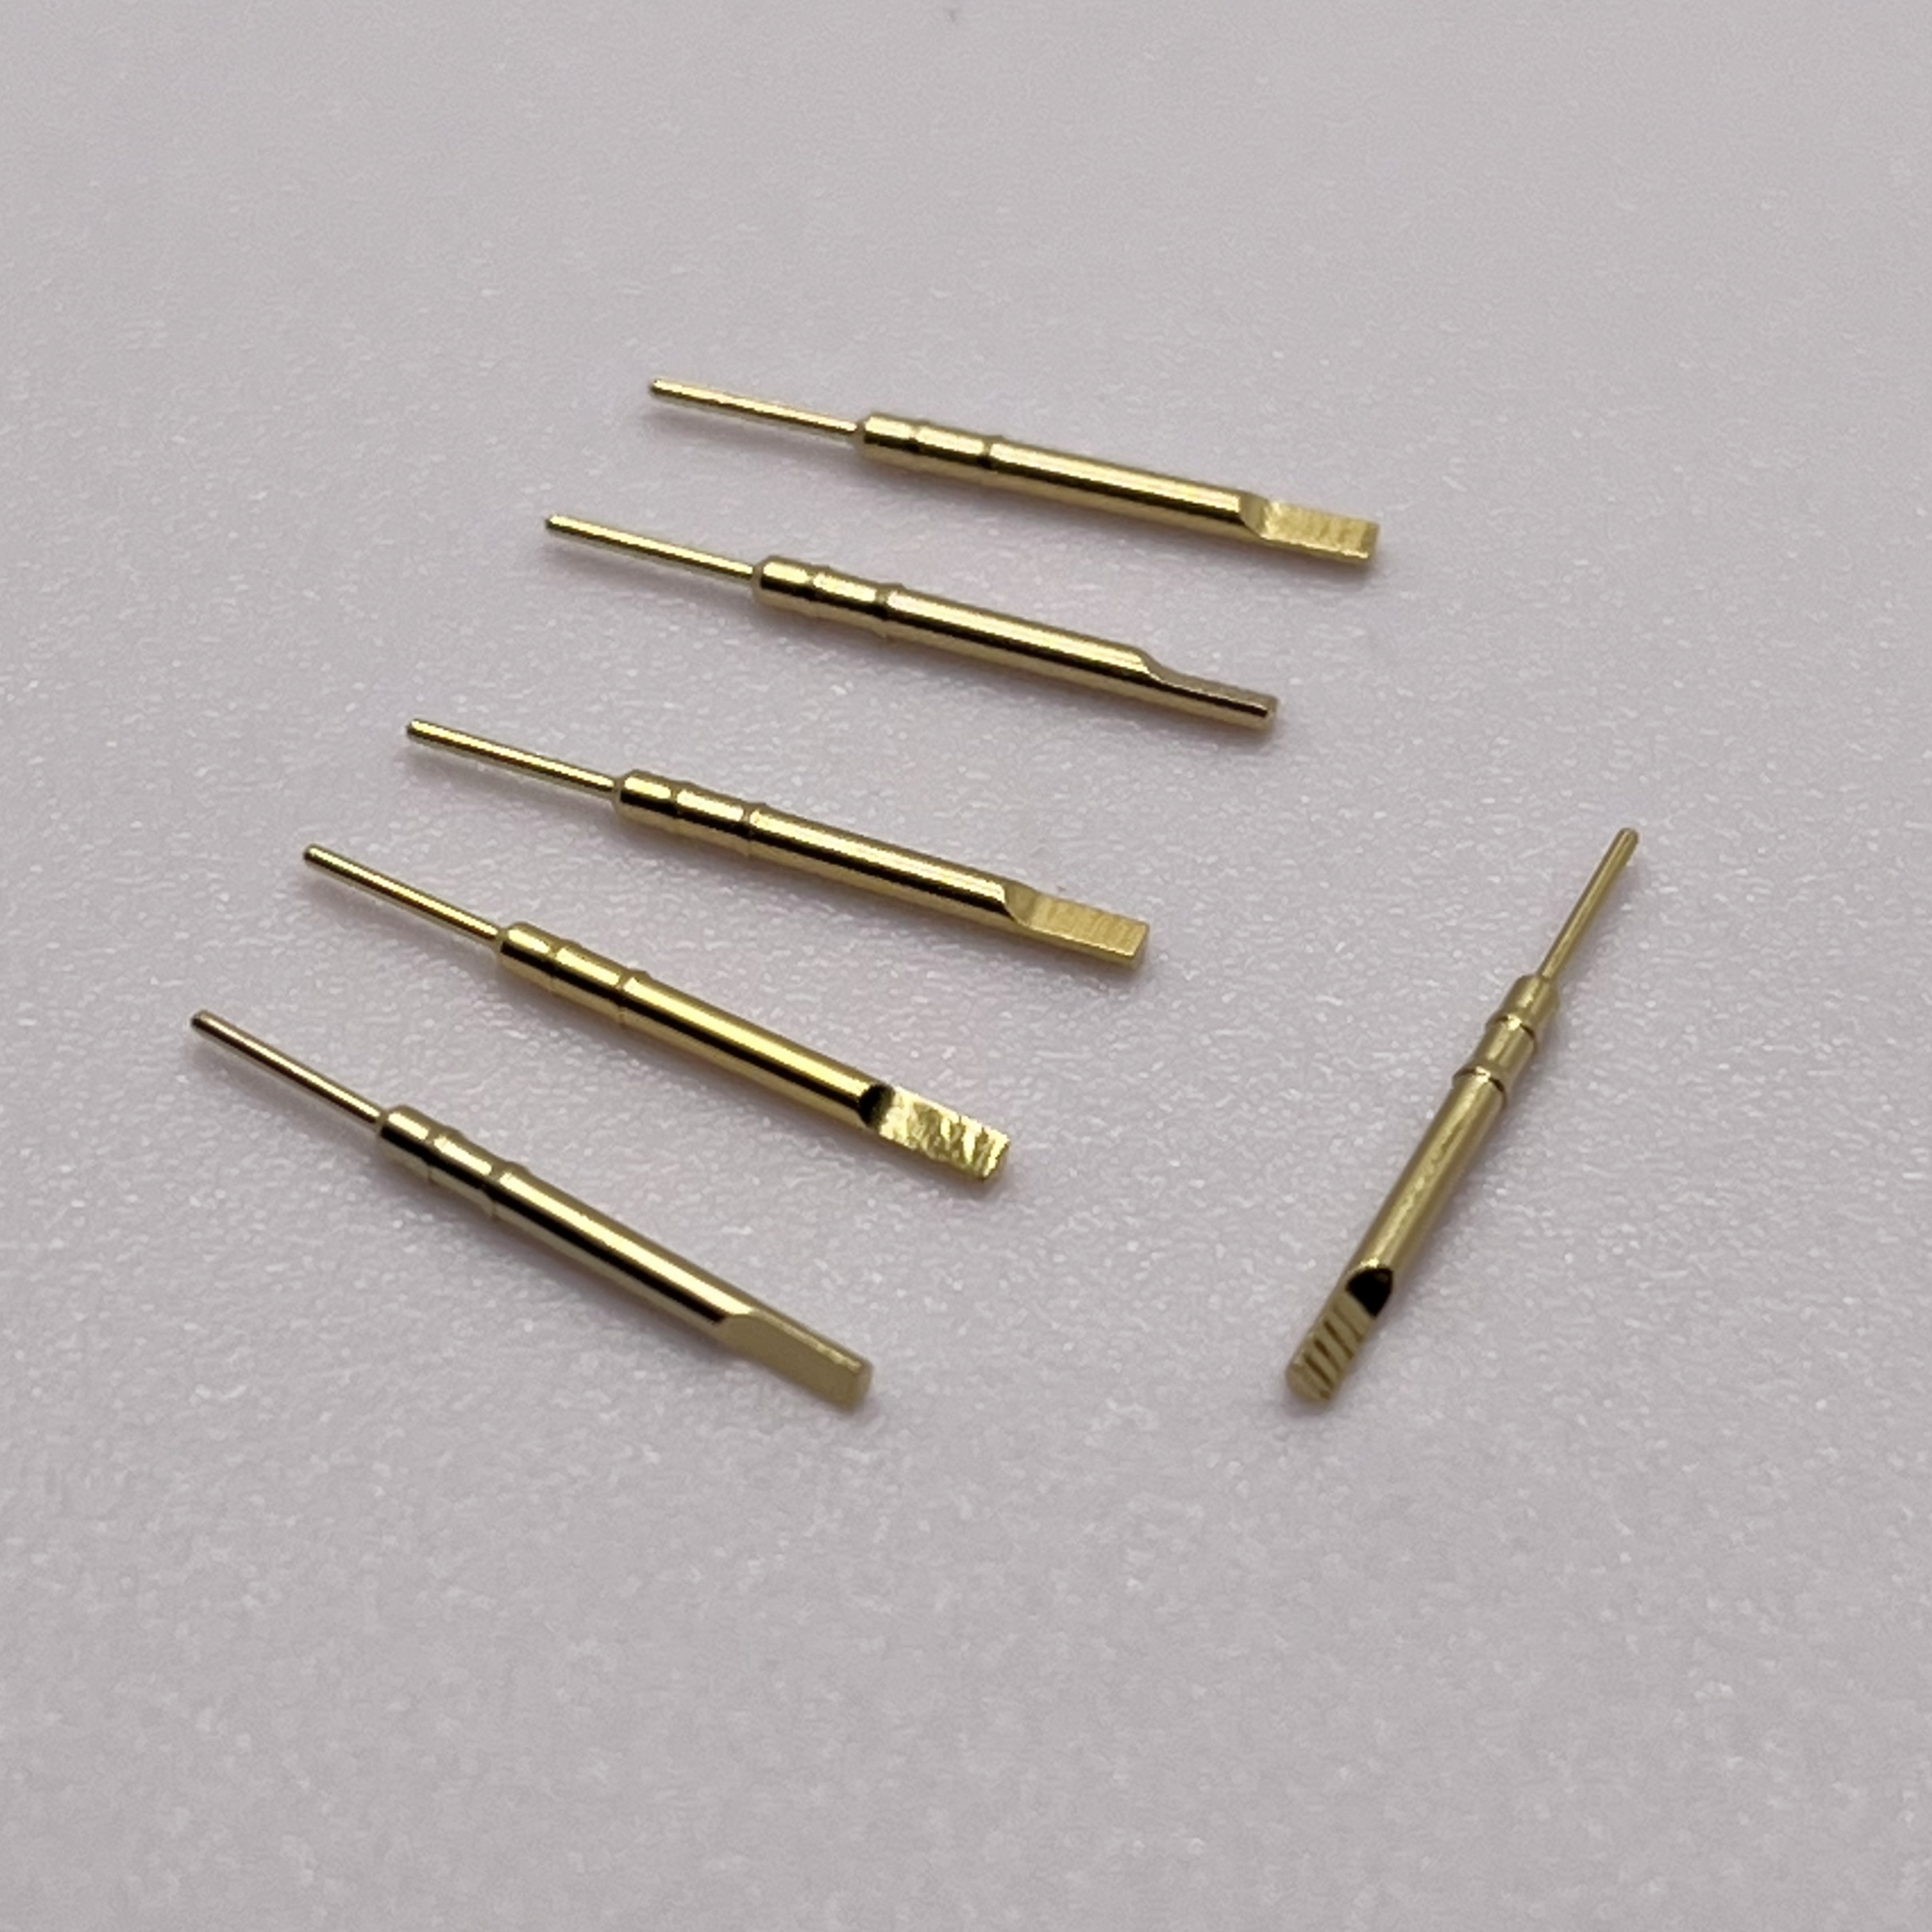 0.45x15mm Industrial Equipments Connector Contact Pins 